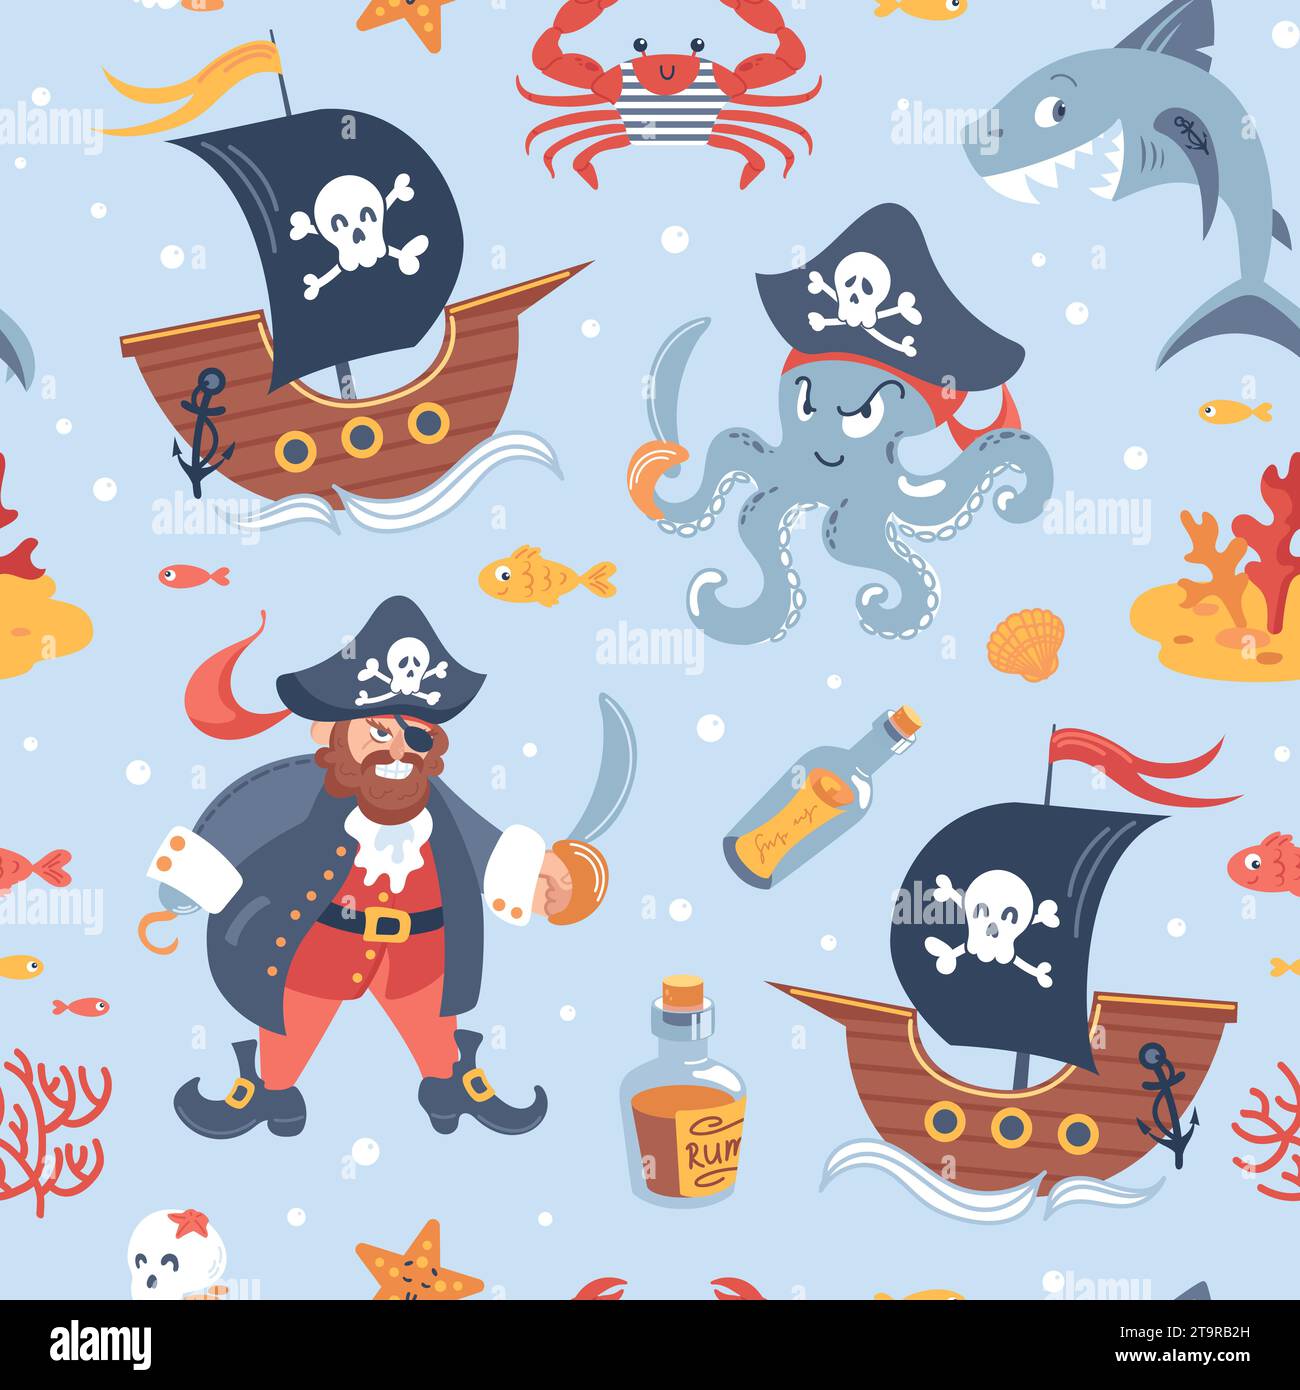 Captain hook ship Stock Vector Images - Alamy